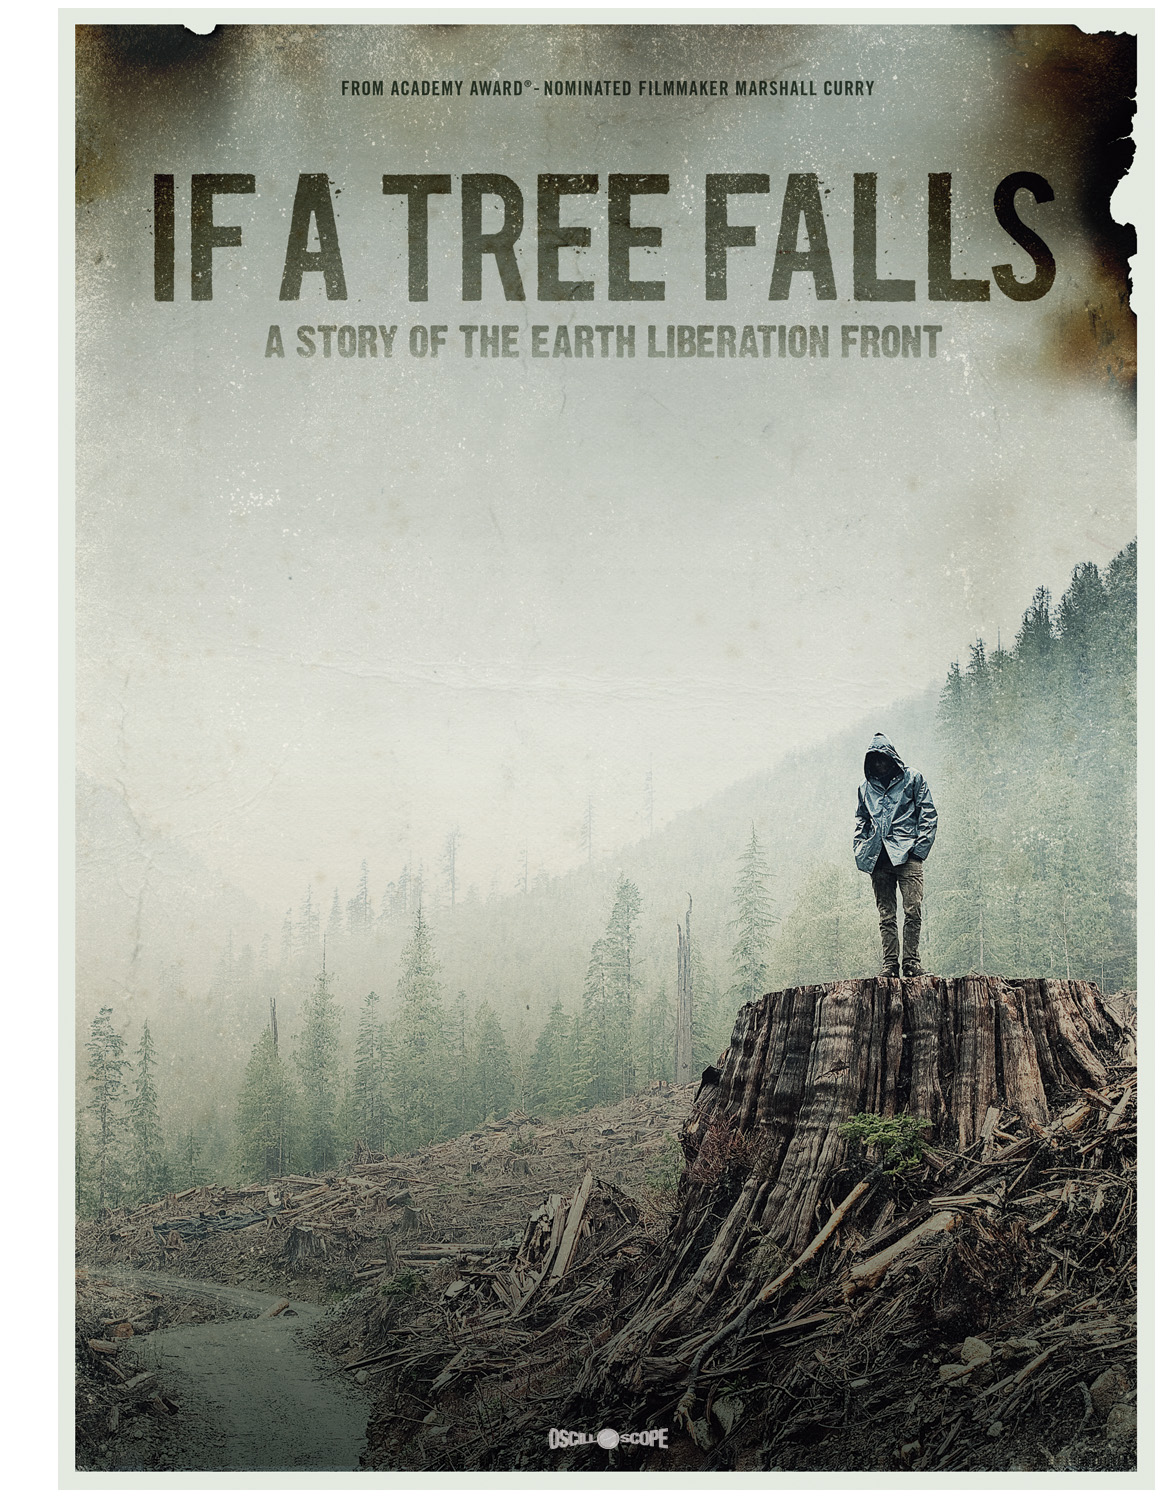 IF A TREE FALLS: A STORY OF THE EARTH LIBERATION